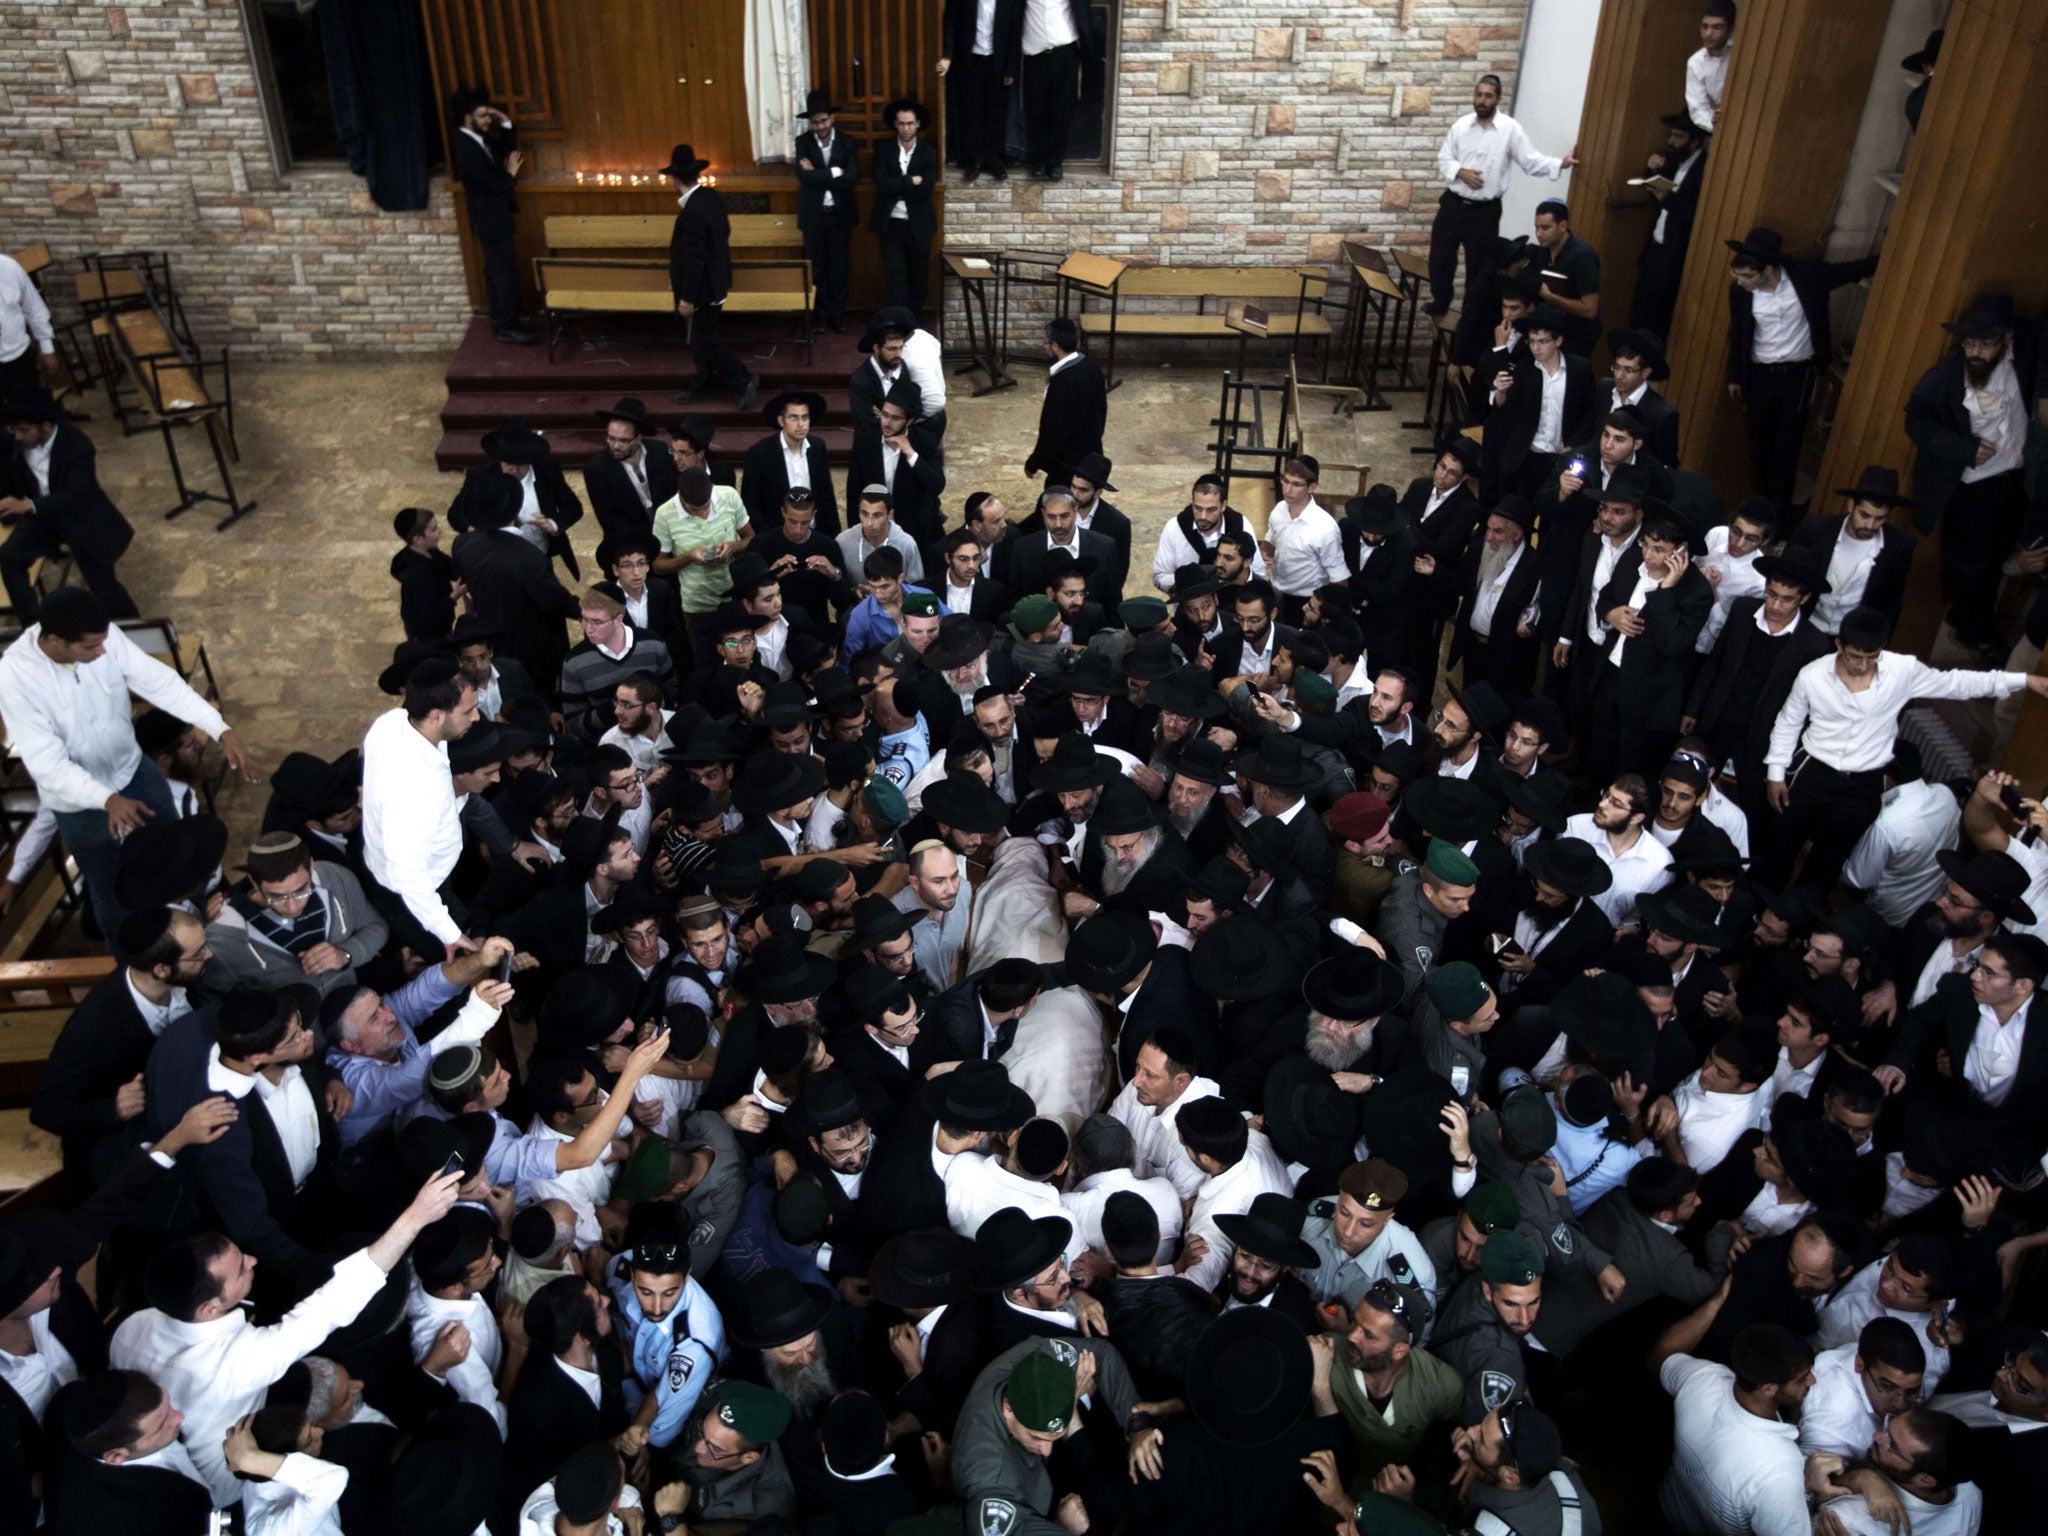 Ultra-orthodox Jewish mourners carry the body of Rabbi Ovadia Yosef during his funeral in Jerusalem